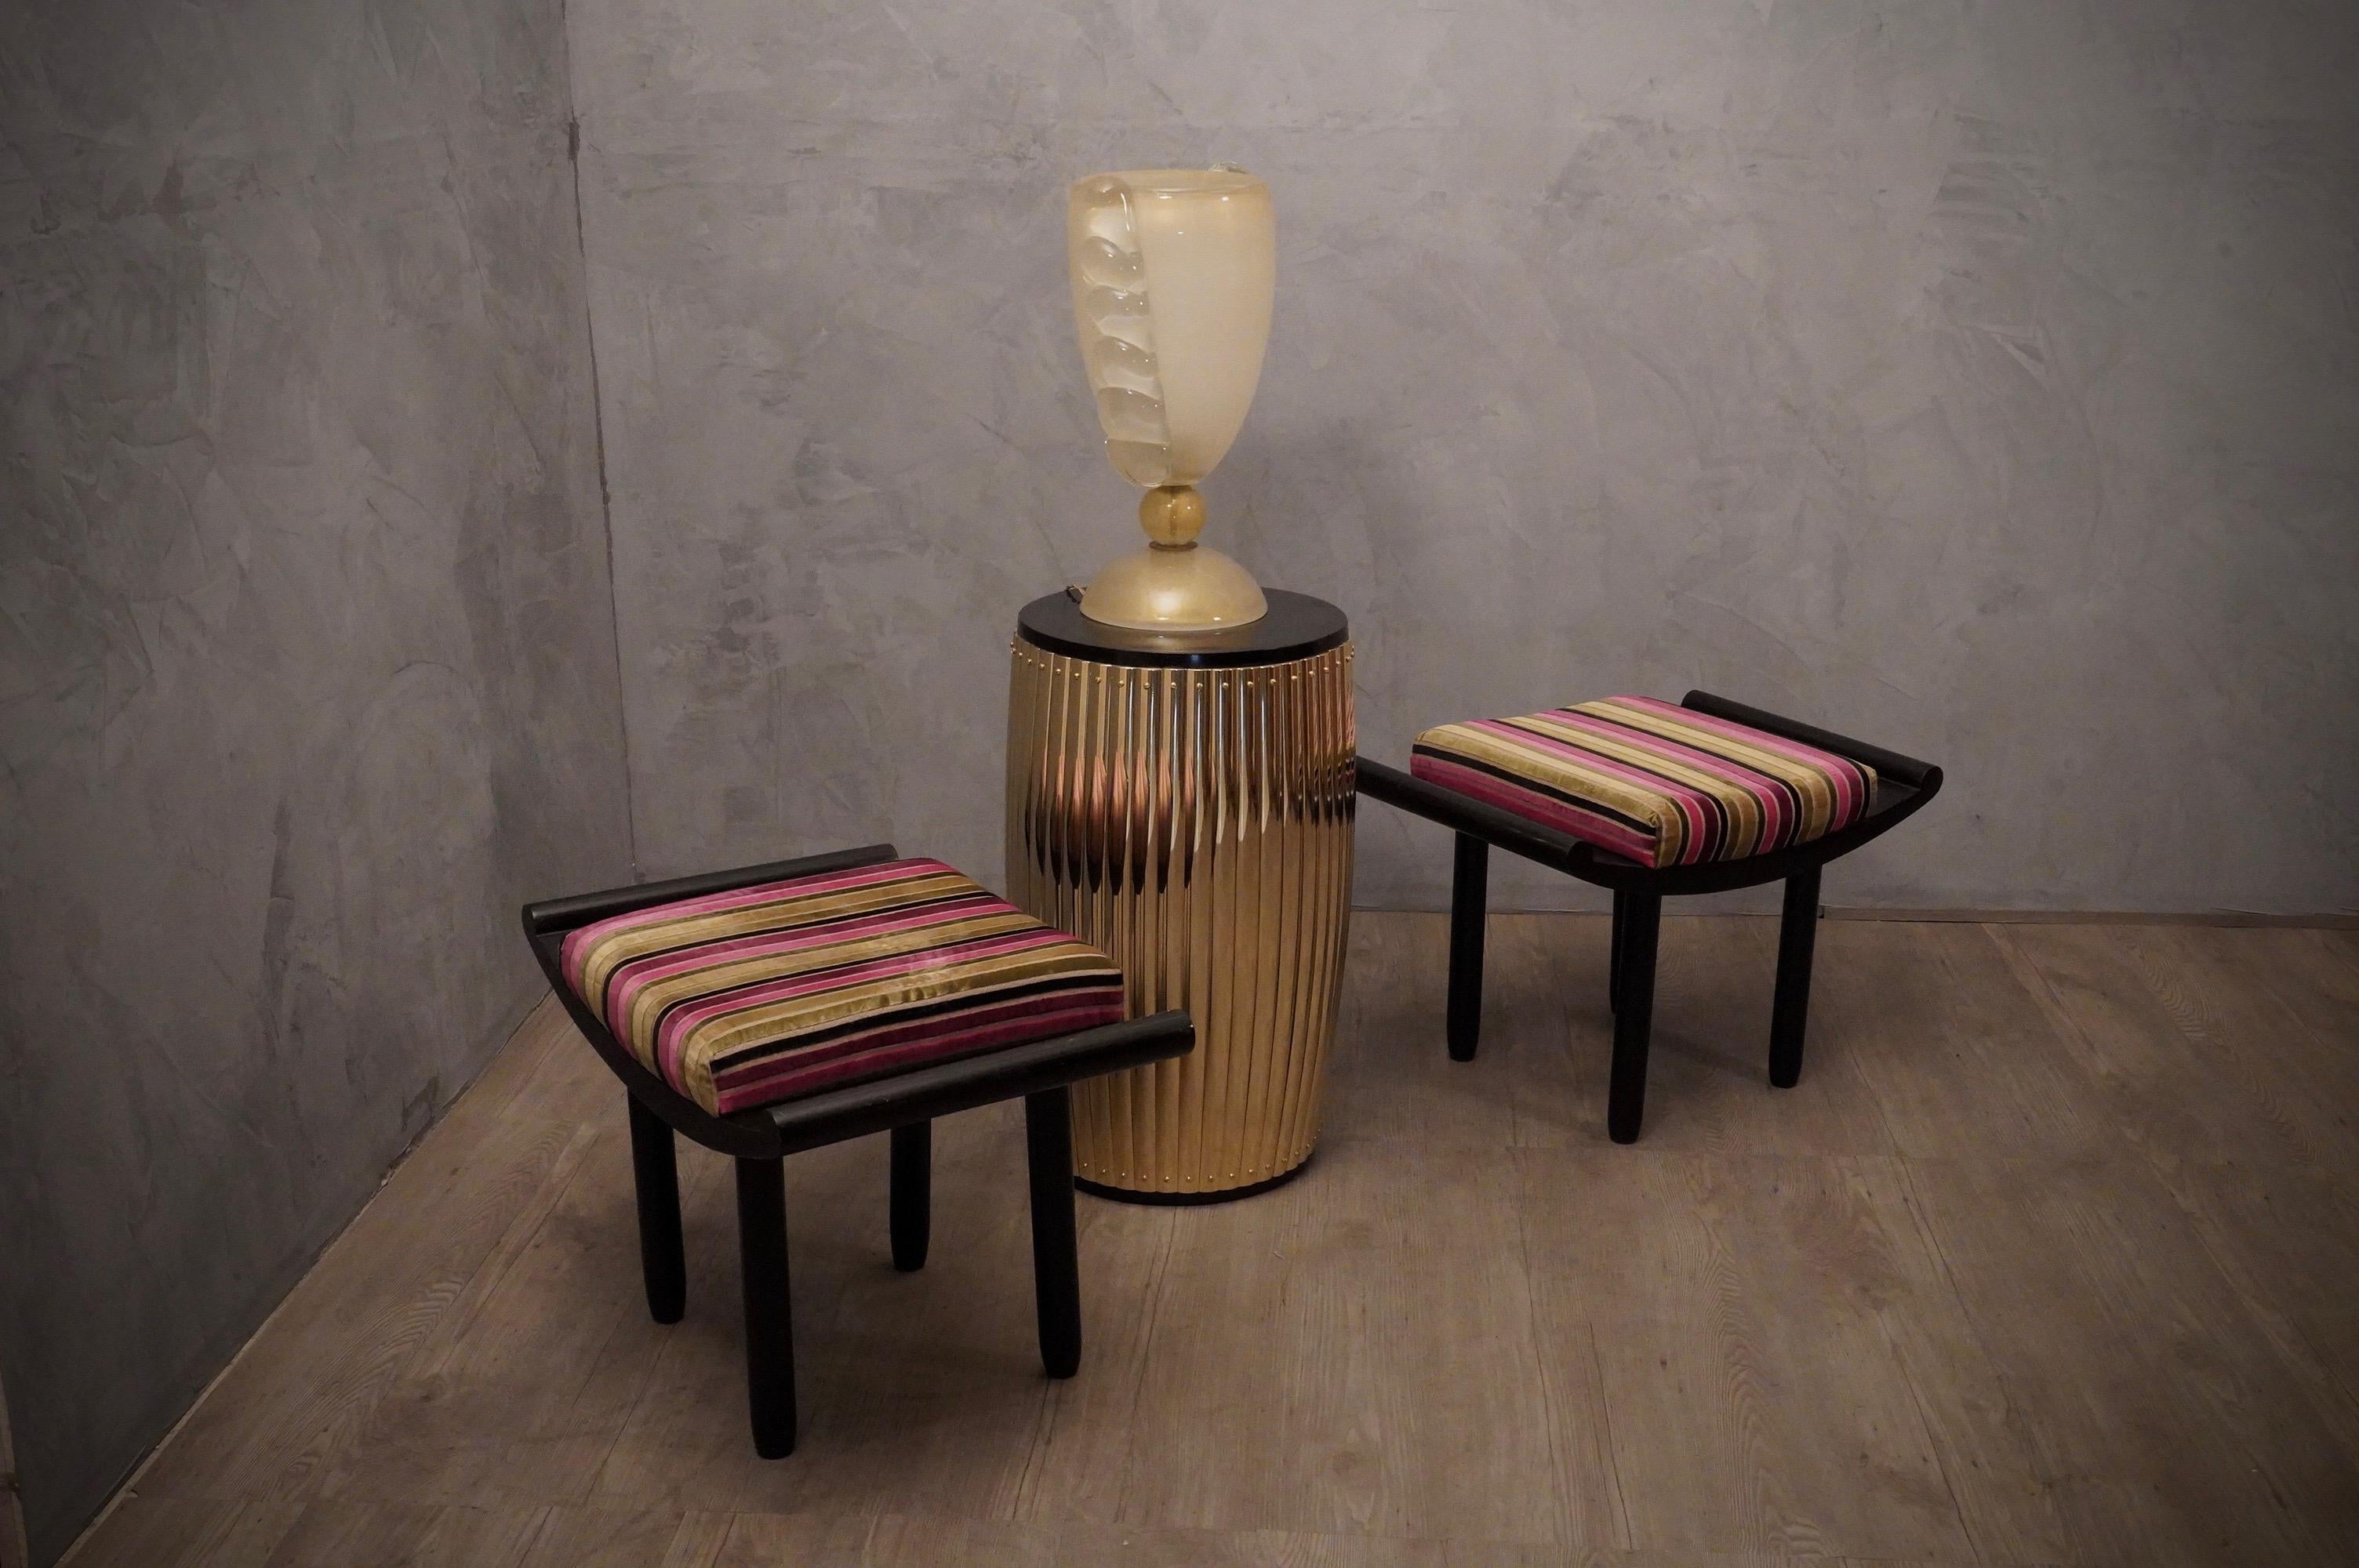 Pair of chinoiserie style stools, all in lacquered wood with black shellac, and enhanced by a splendid and precious multi-colored striped fabric.

French benches, in black lacquered wood. Four cylindrical legs, allow the benches to stay high from